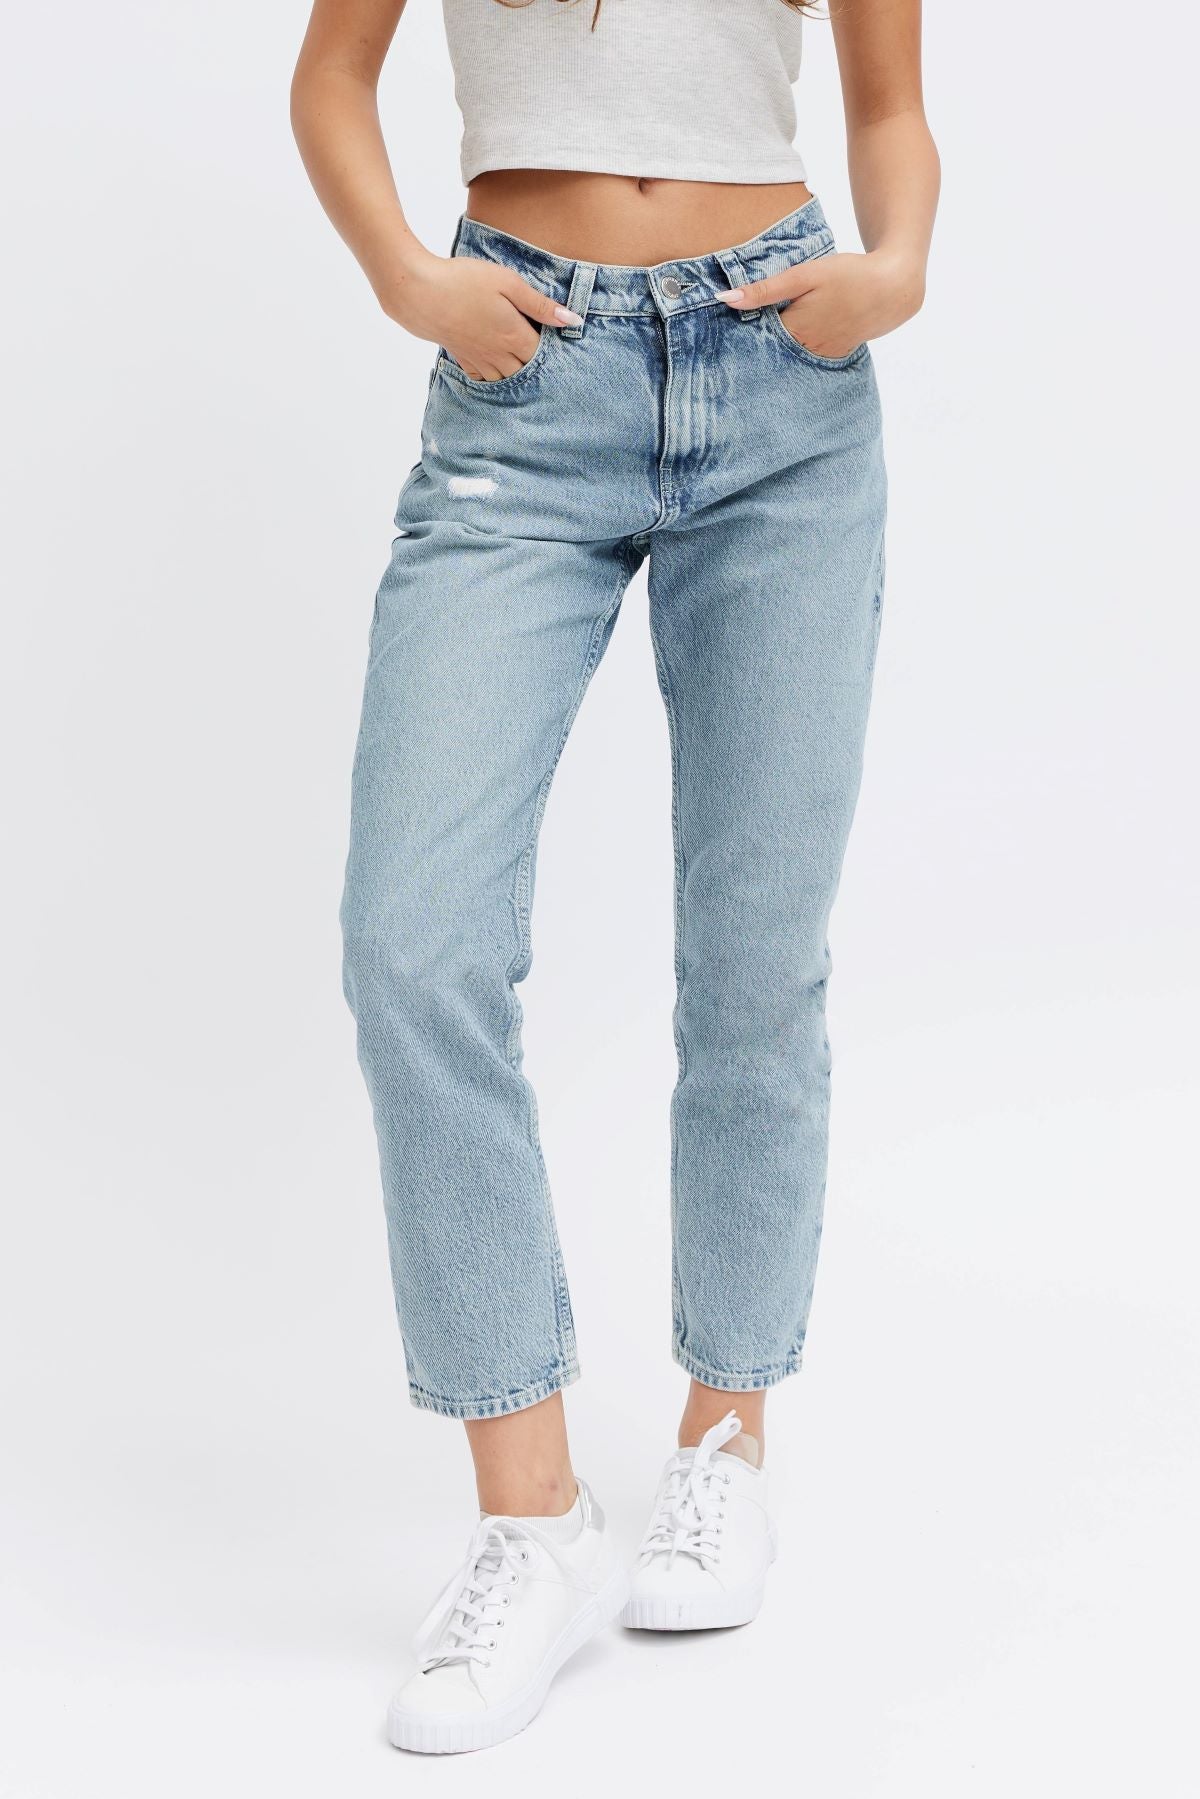 Organic cropped jeans for women - Vegan and 100% organic